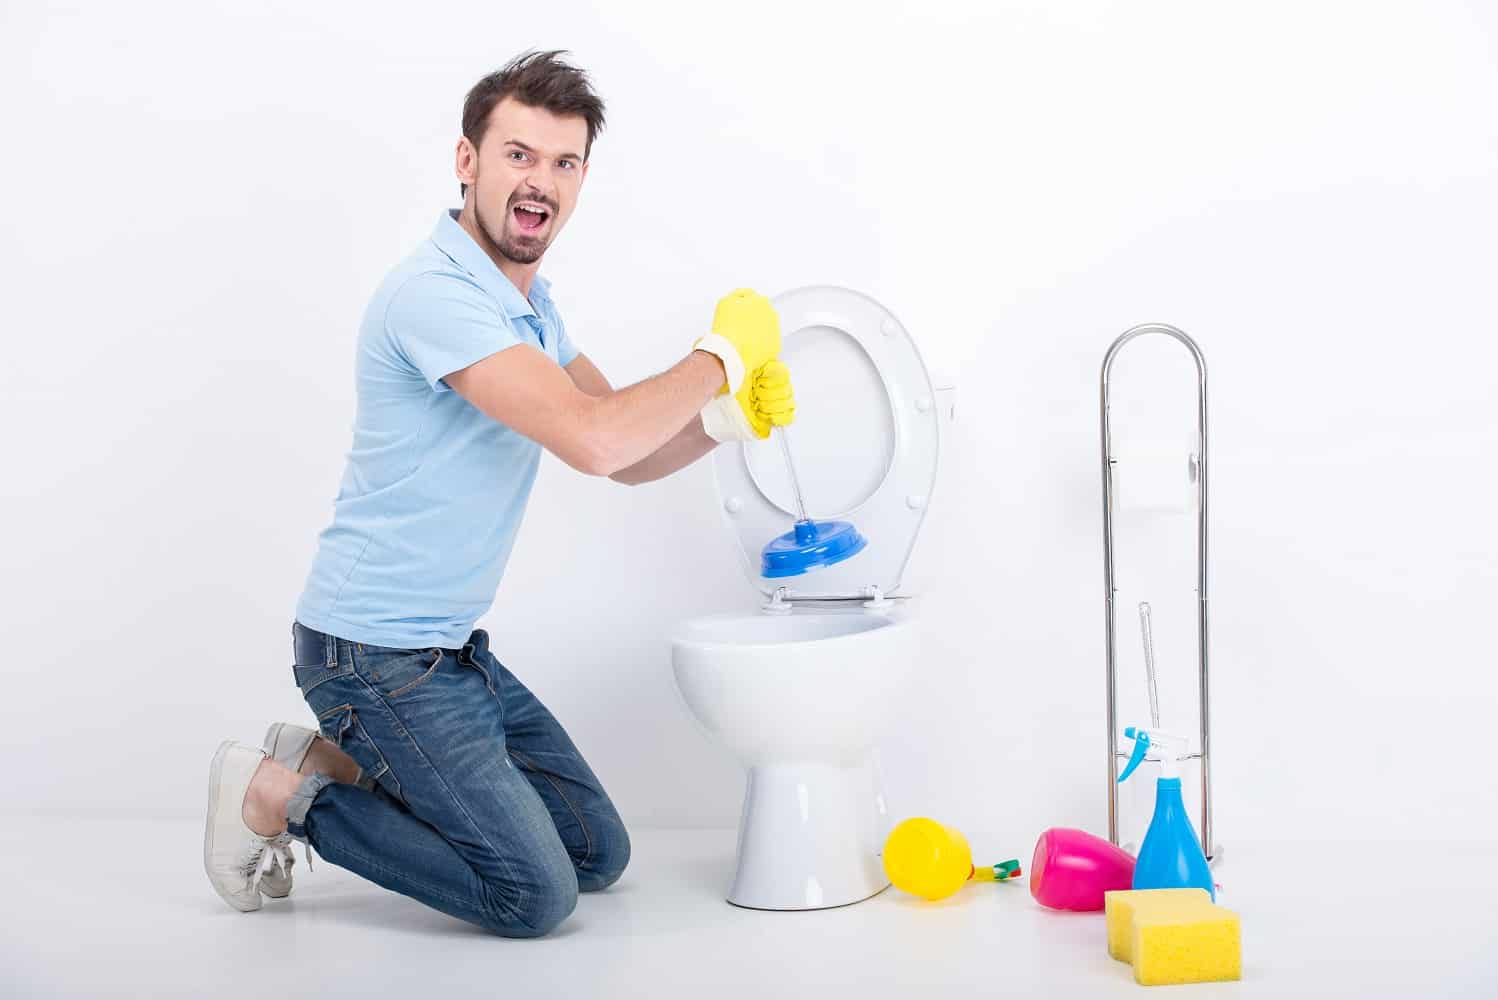 Young man unclogging a toilet with plunger.